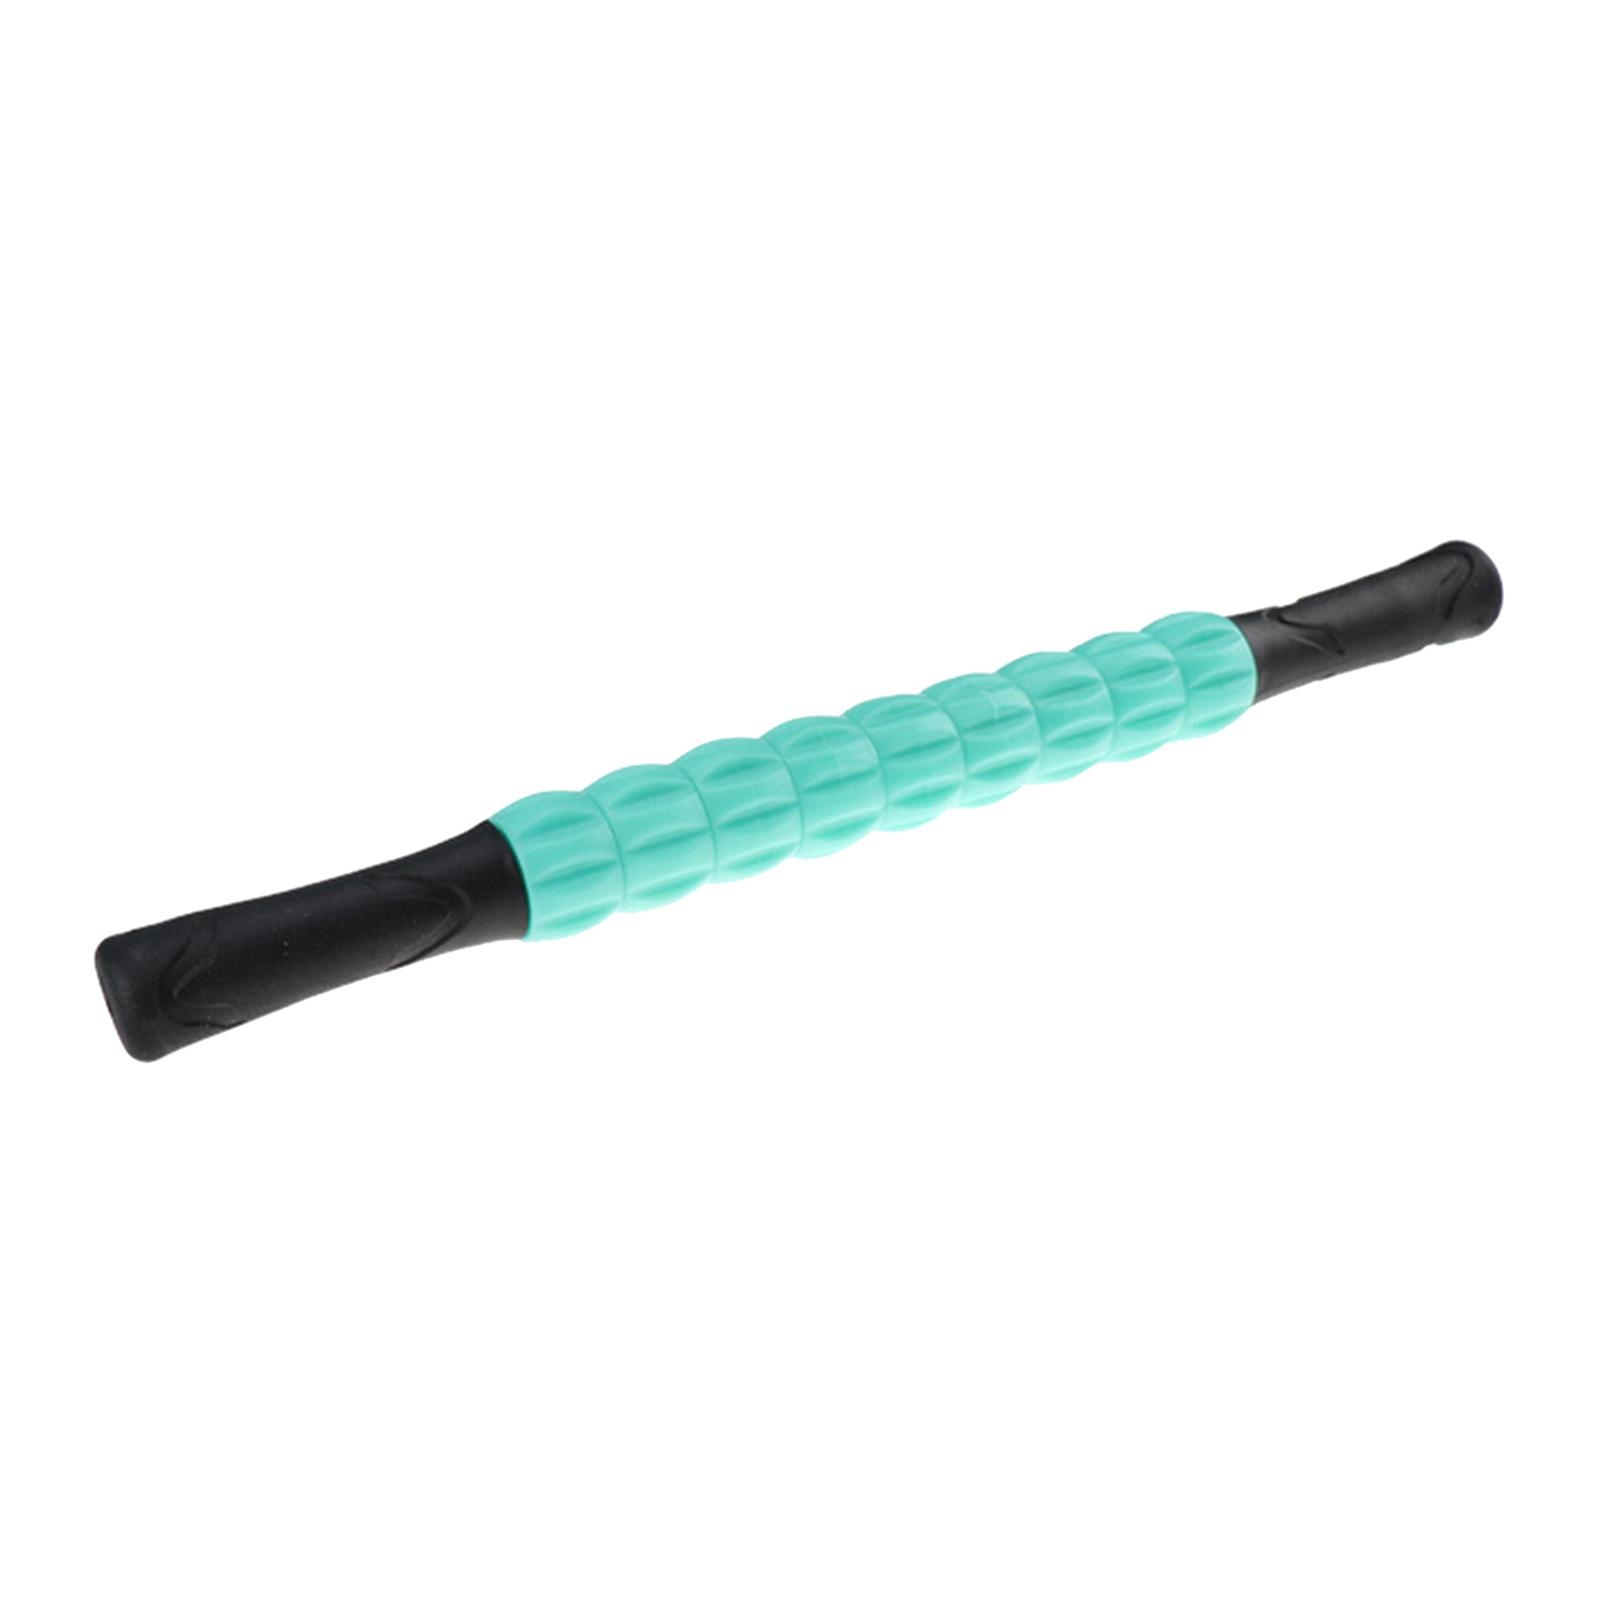 Portable Muscle Roller Stick for Athletes Full Body Massage Sticks Green